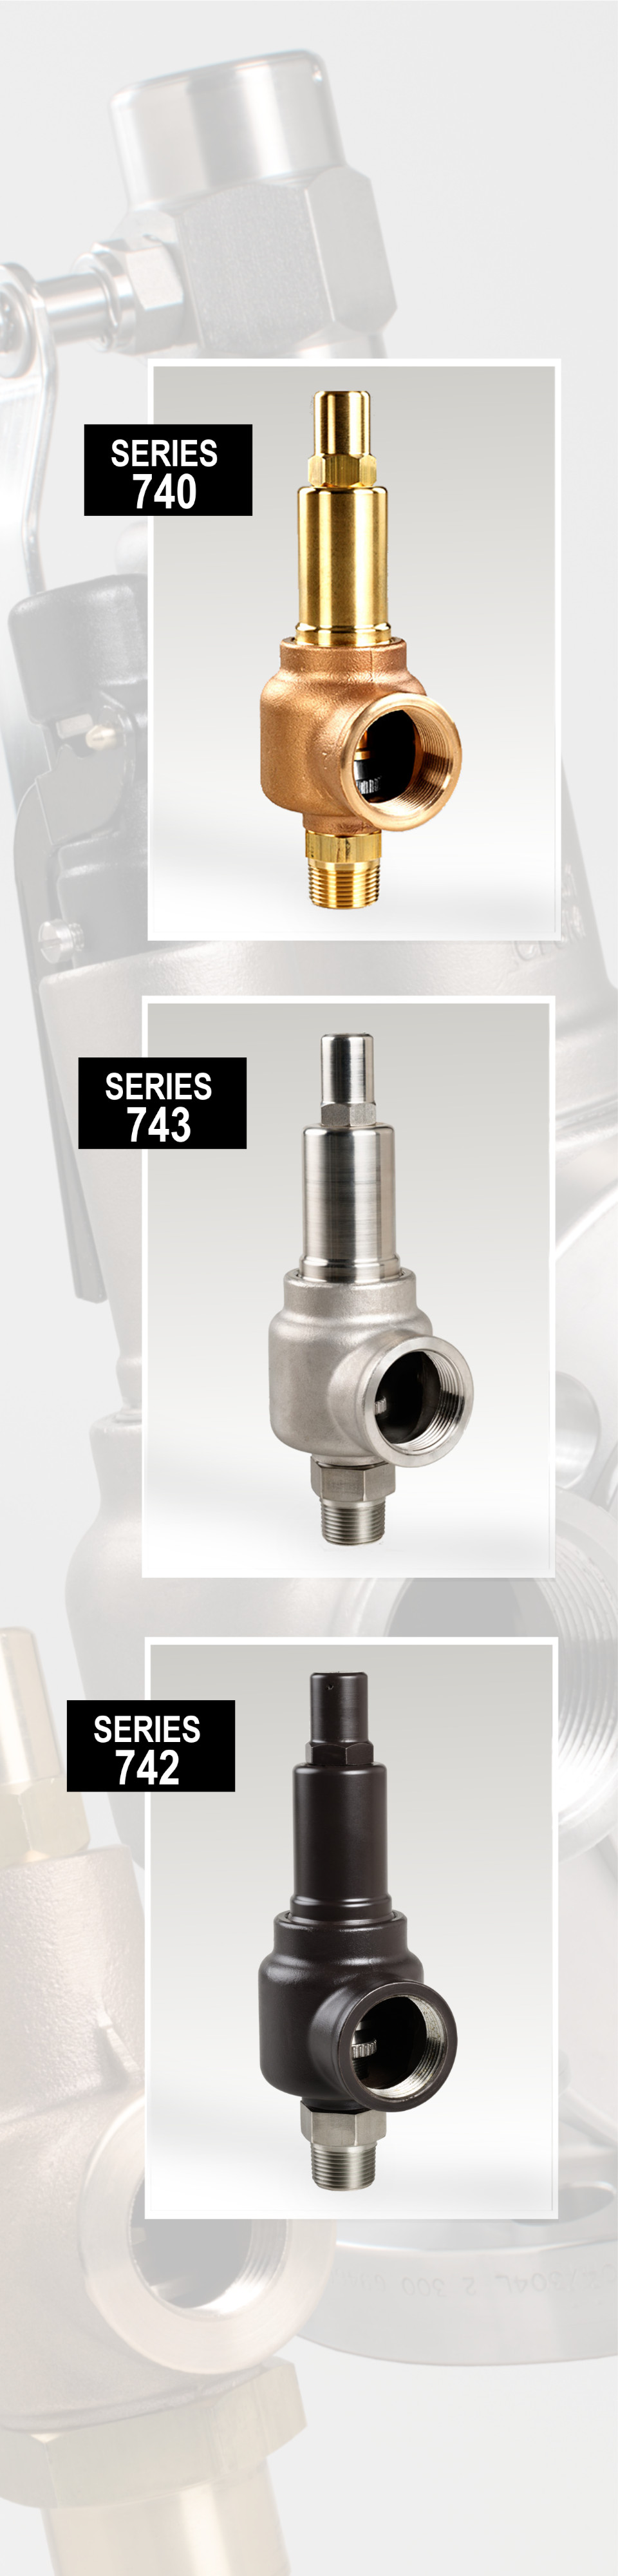 Series 740 brass stainless and carbon steel safety relief valves